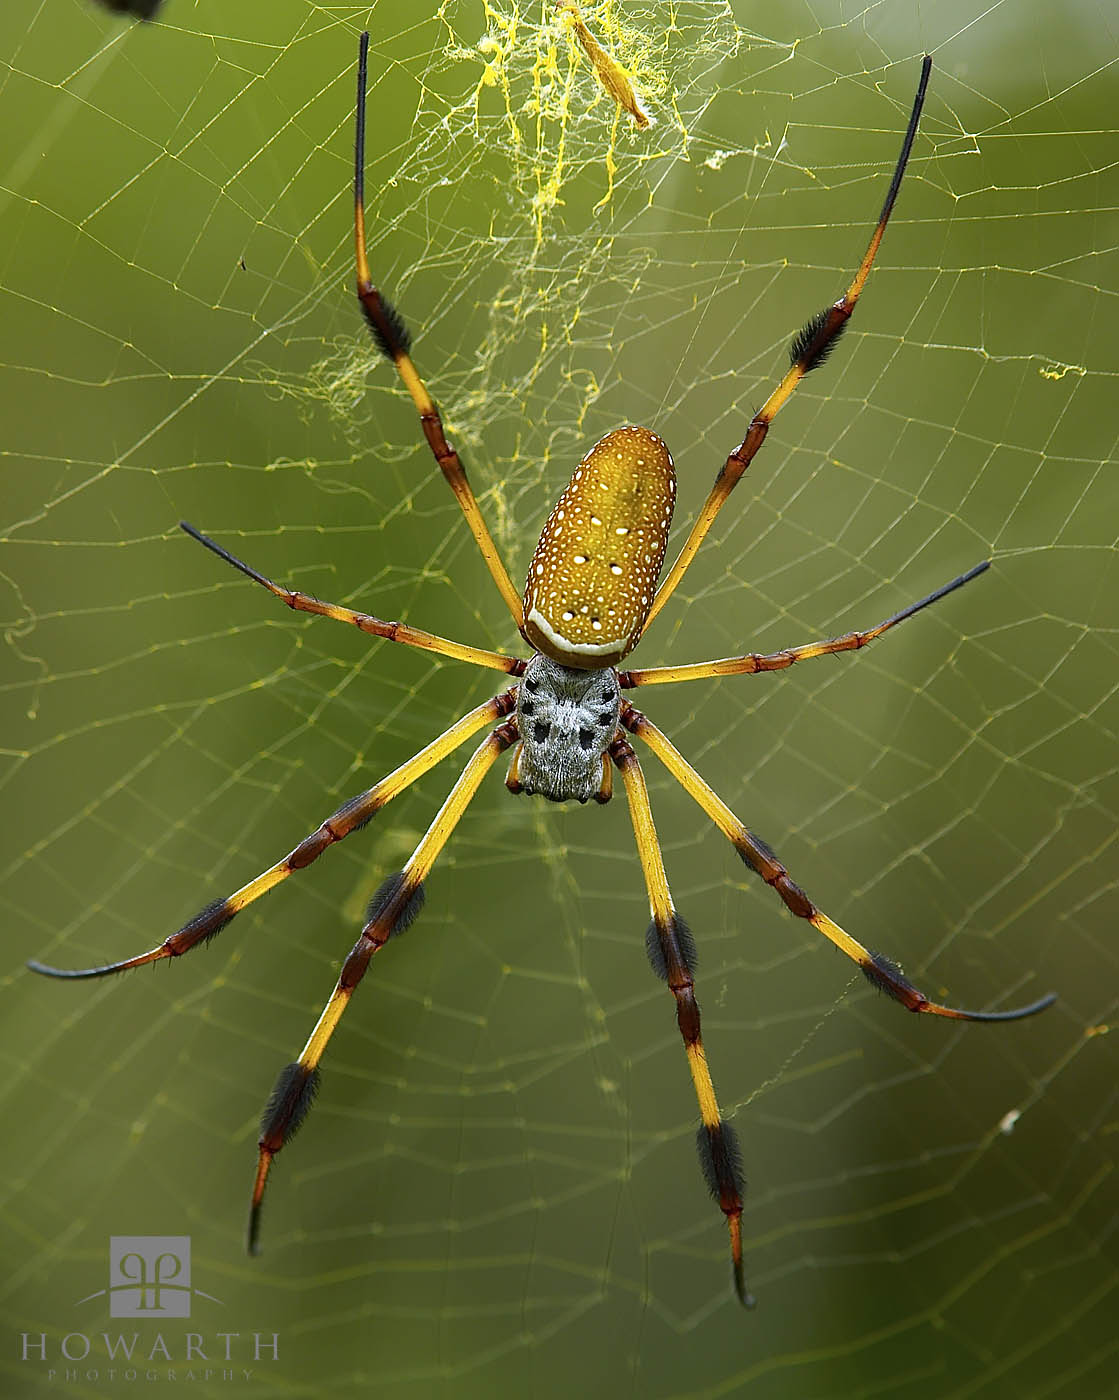 Locally known as Silk spiders or Banana spiders these are often found during hurricane season and spin their golden web's high...